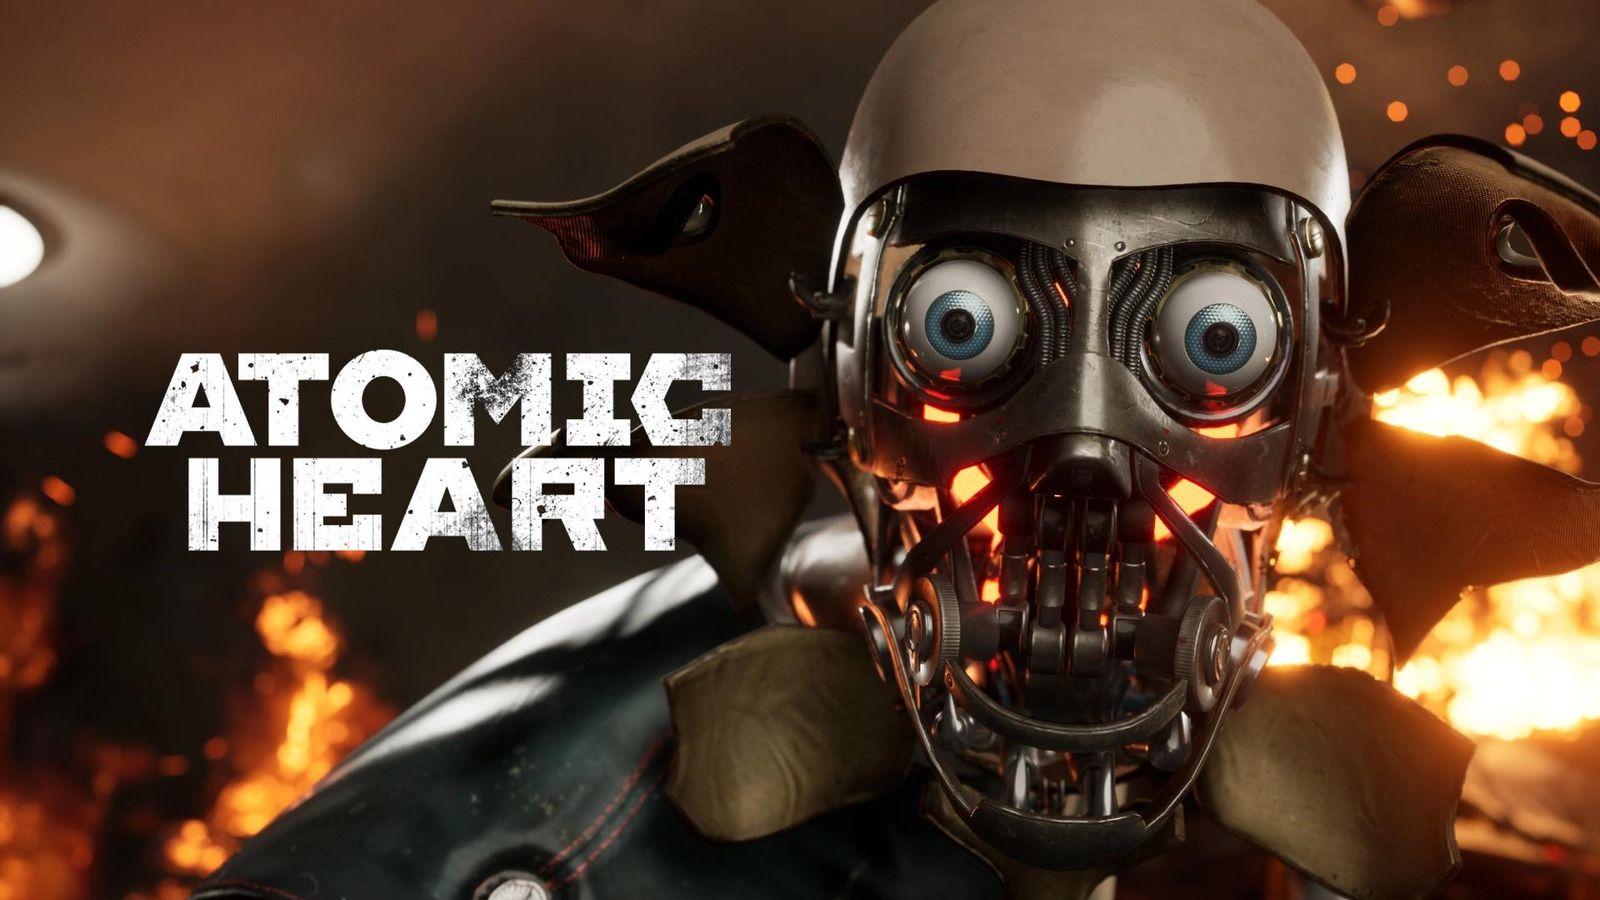 Atomic Heart robot with logo